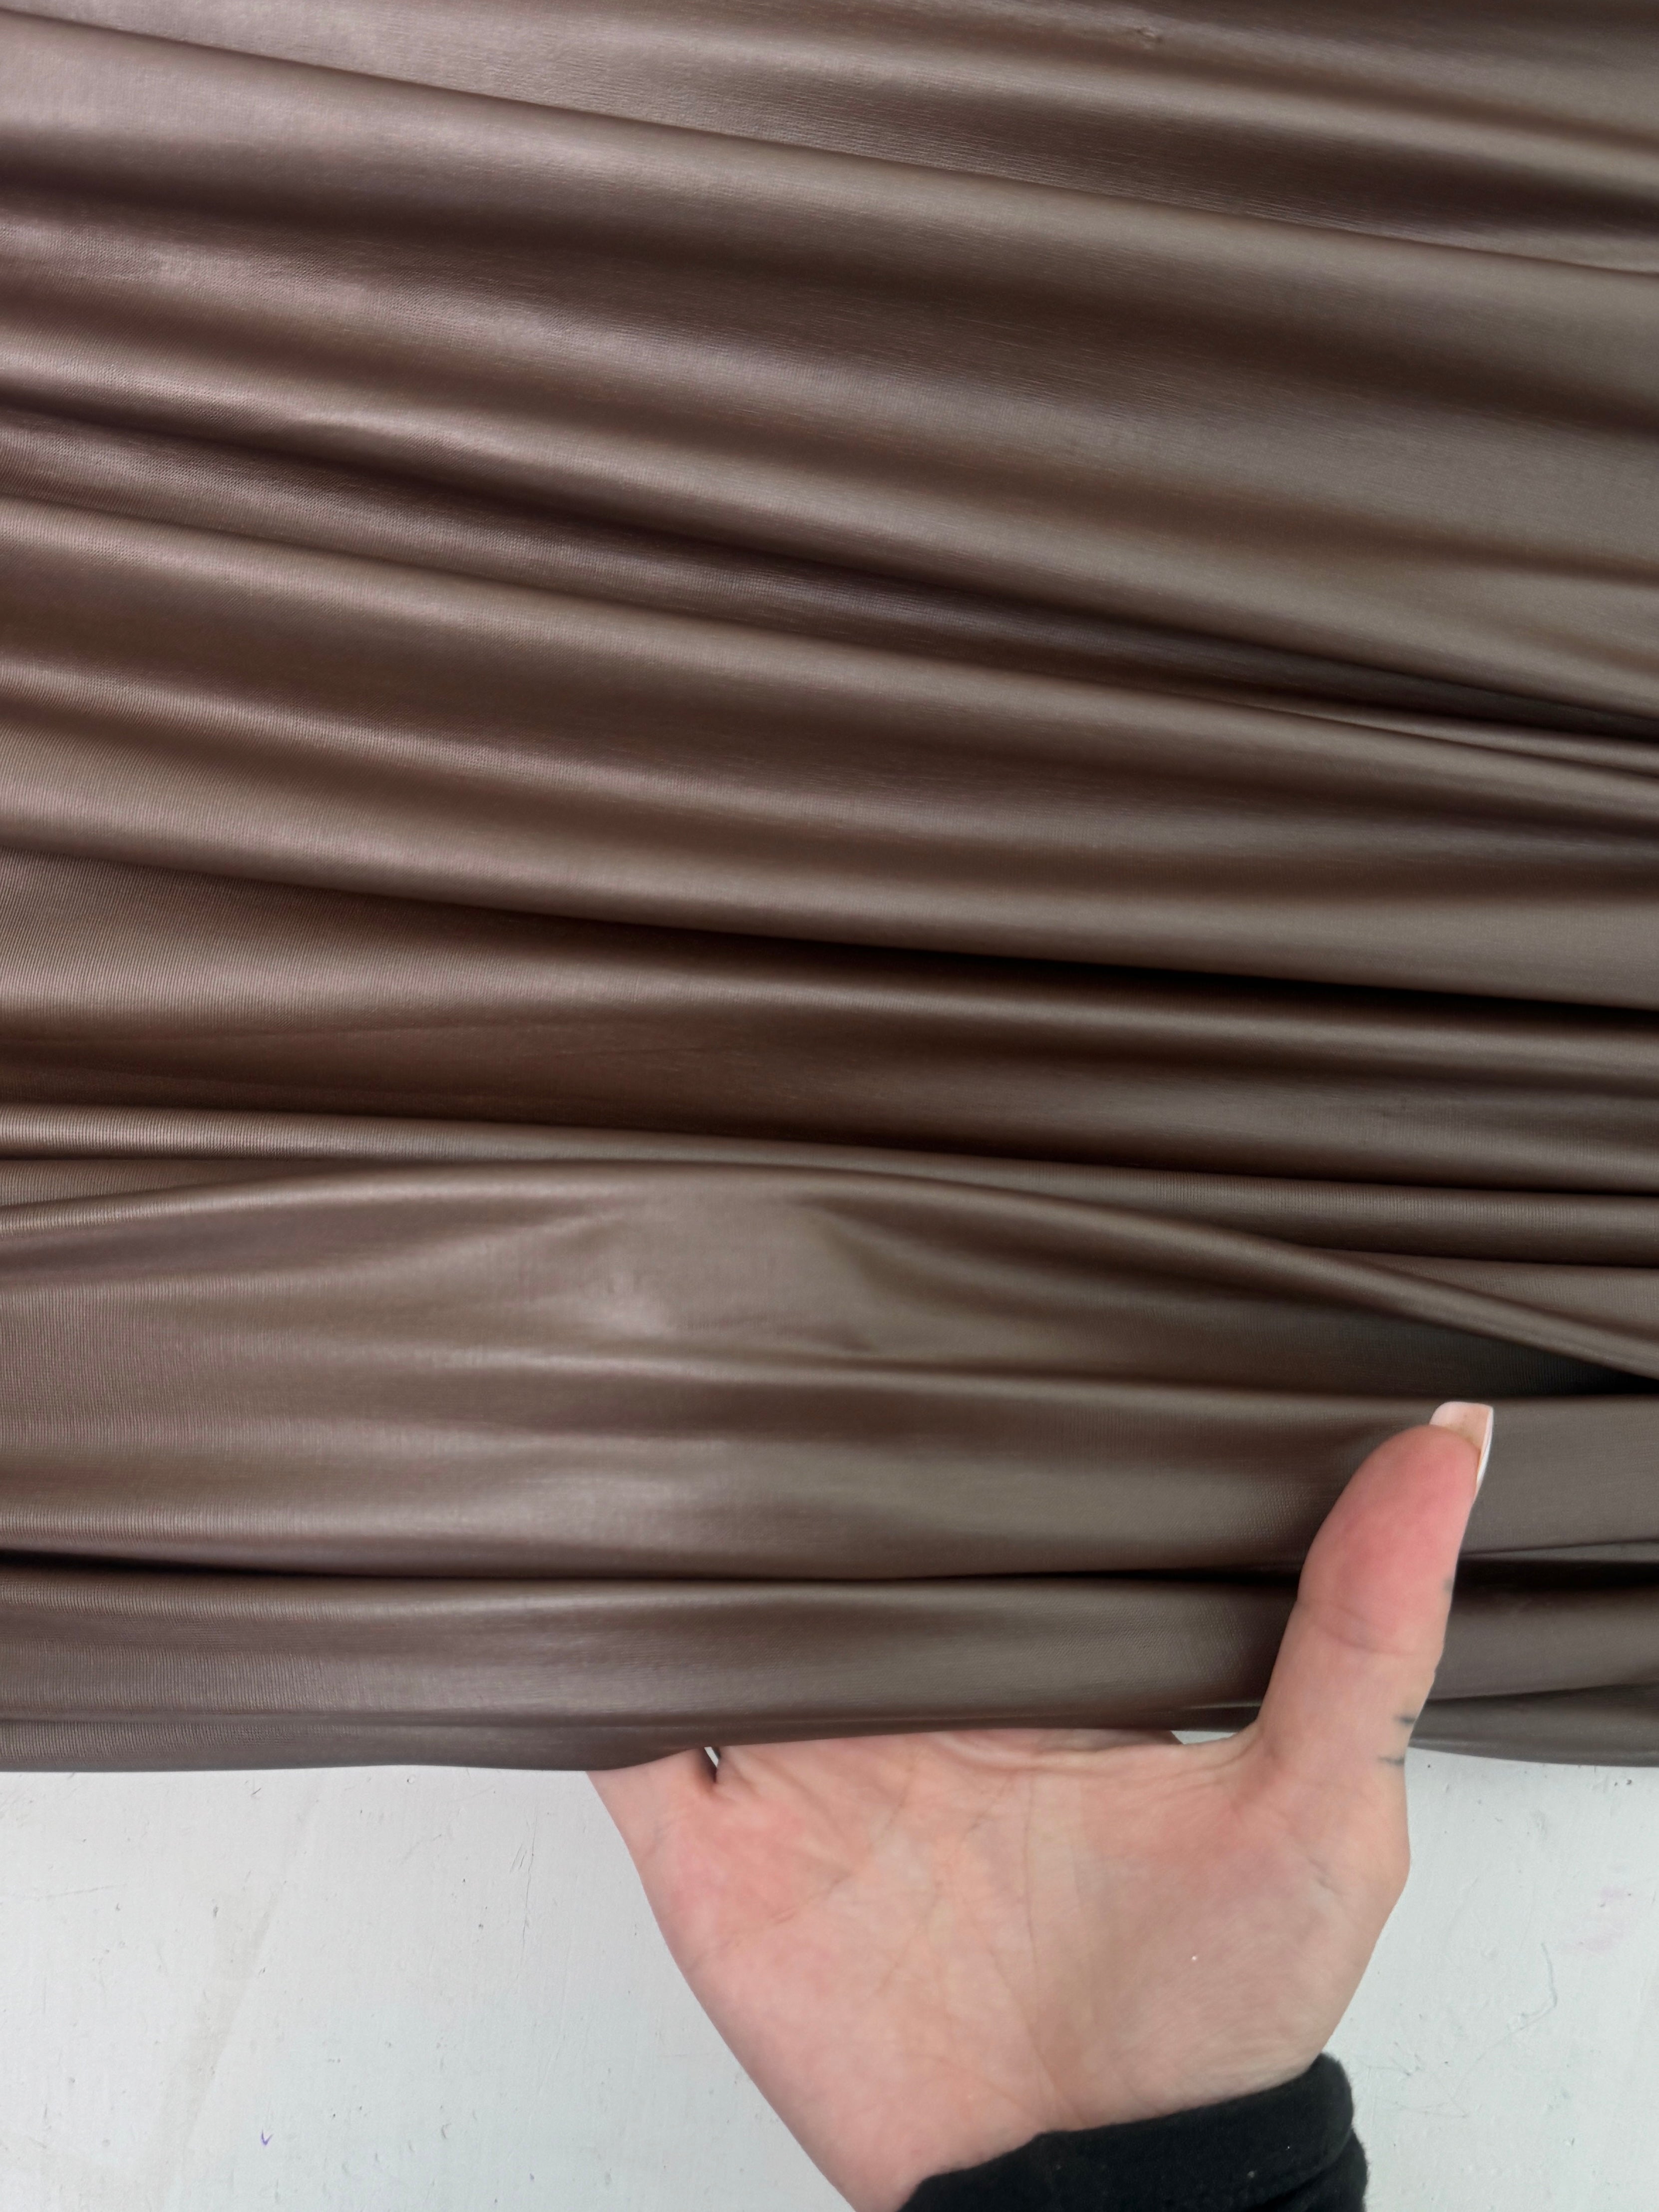 Chocolate Brown 4 Way Stretch Faux Leather, light brown all way stretch faux leather for woman, dark brown faux leather for costumes, brown faux leather for home decor, 4 way stretch faux leather, leather for blazers, cheap leather, discounted leather, leather on sale